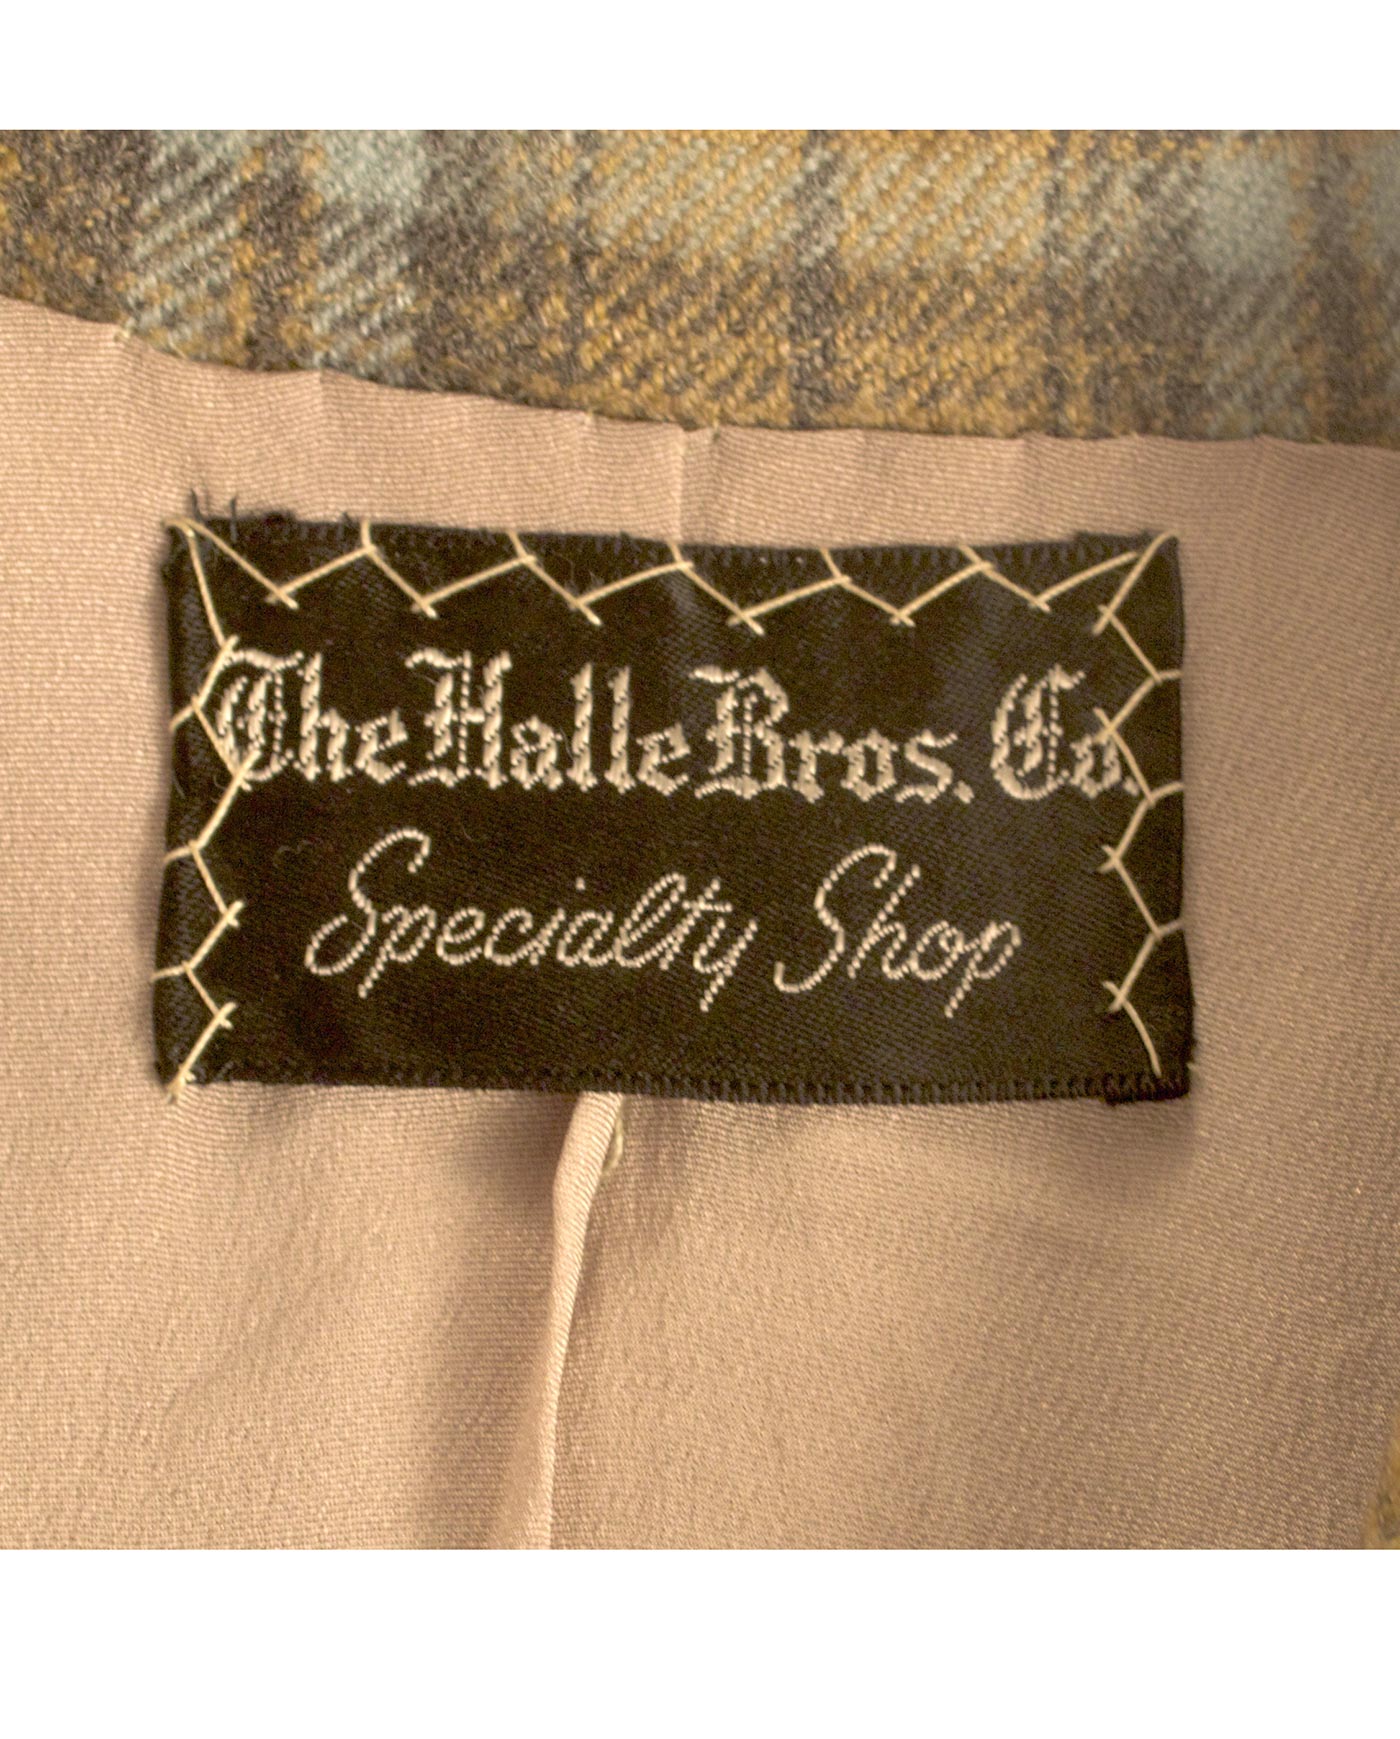 THE HALLE BROS.Co. wool jacket 50s